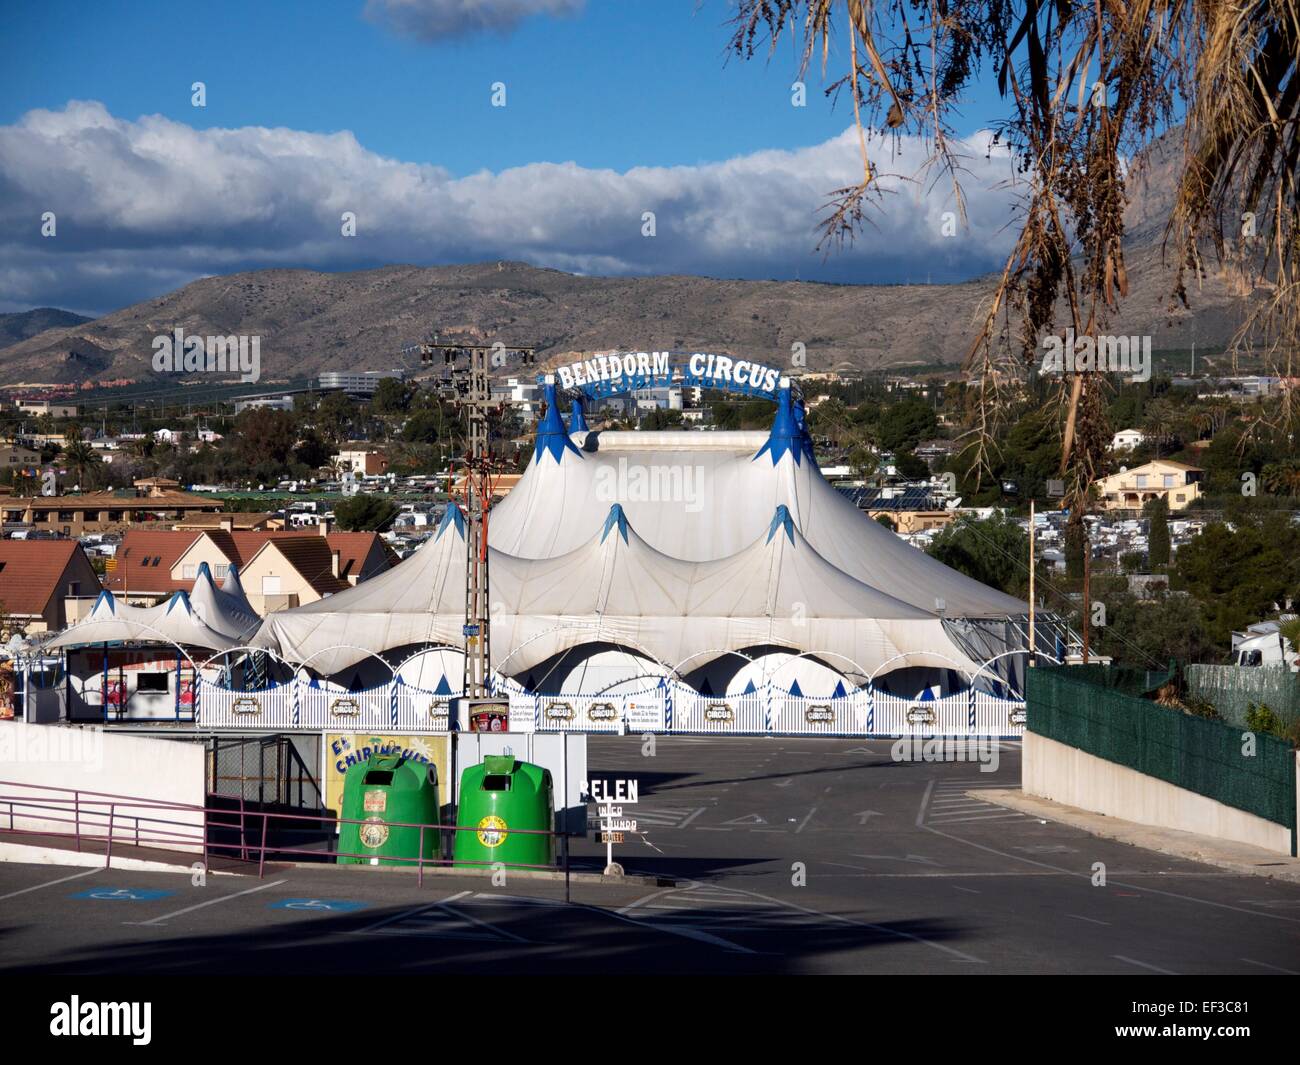 Benidorm Circus tent with hills in the background Stock Photo